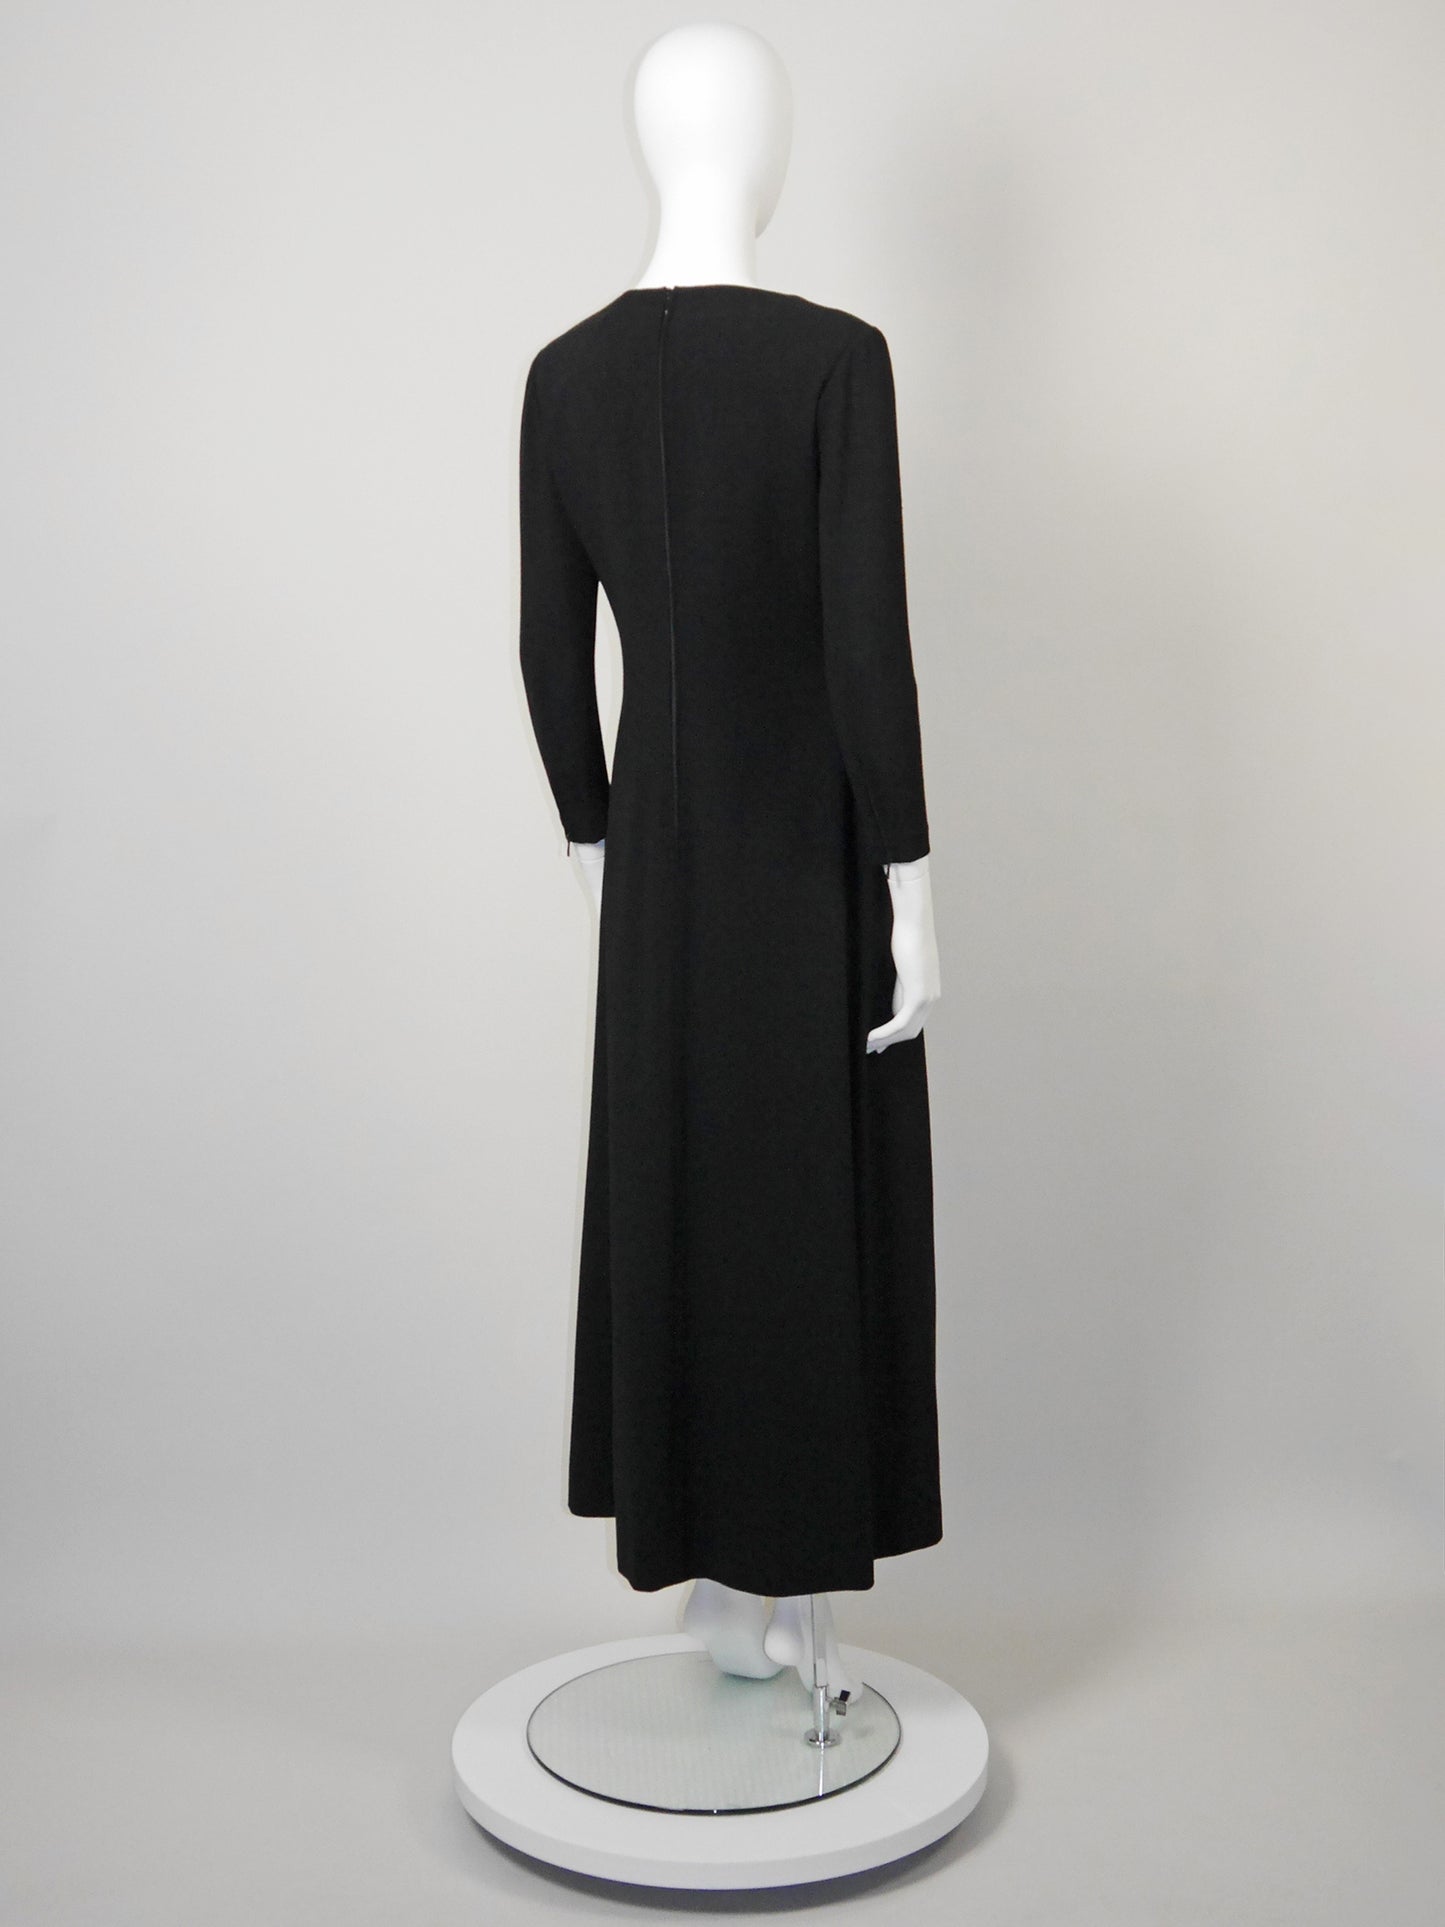 LOUIS FÉRAUD 1960s 1970s Vintage Maxi Evening Dress w/ Knotted Front Size S